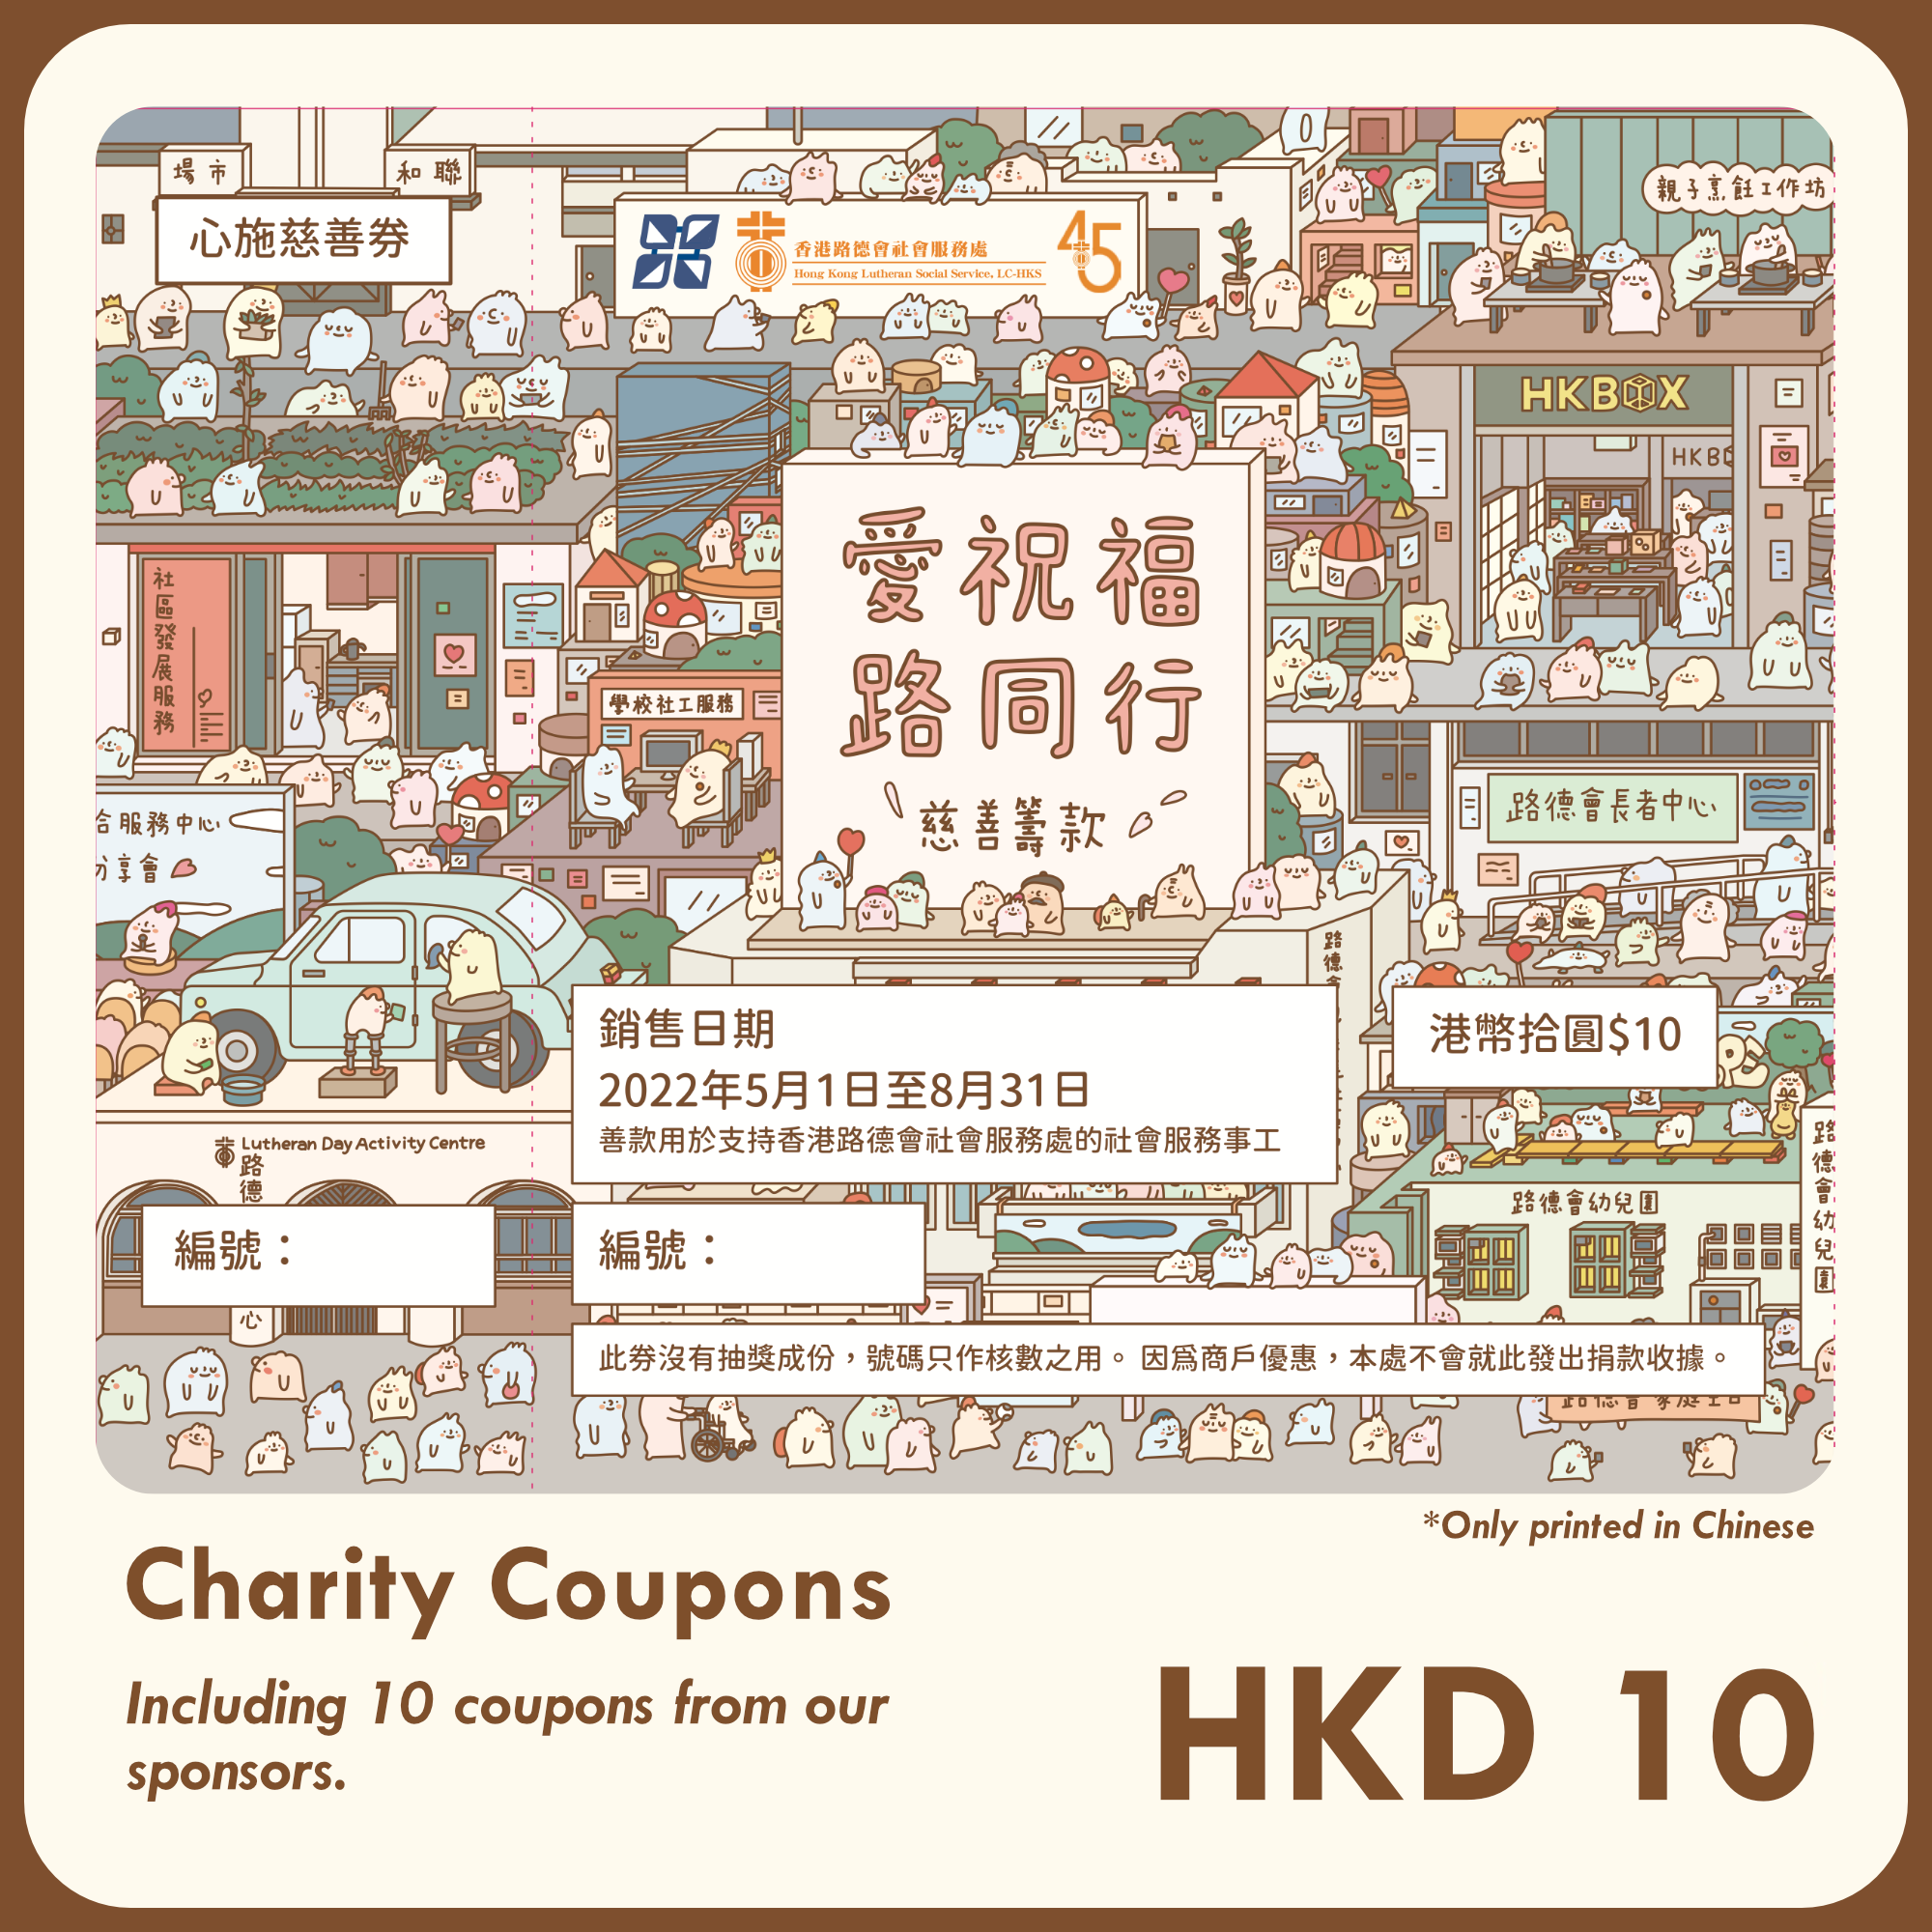 Charity Coupons